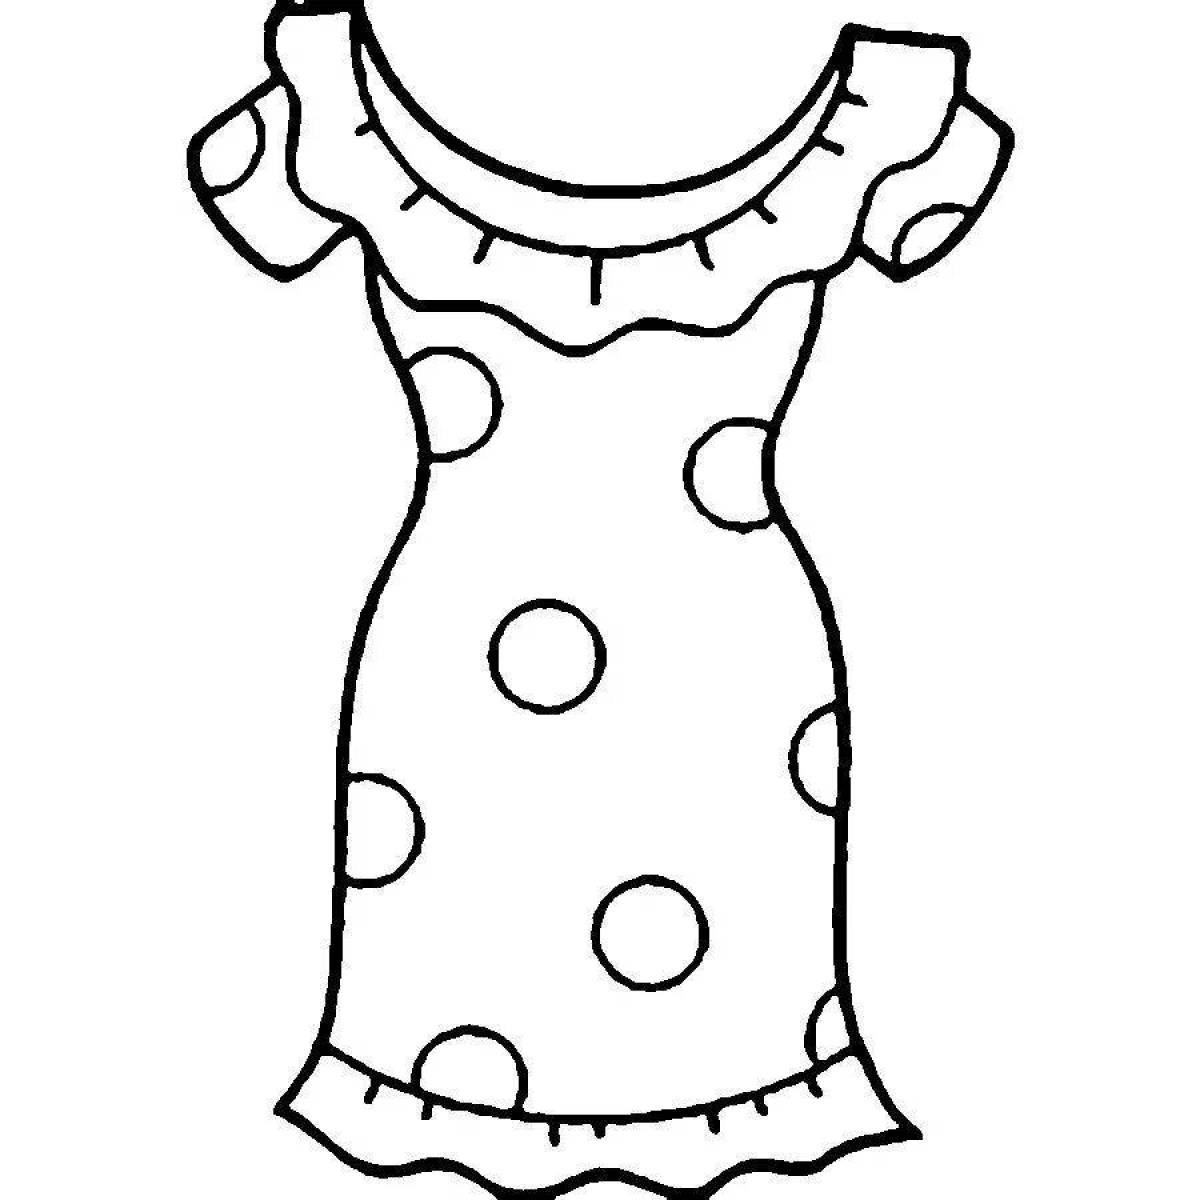 Coloring children's colorful sundresses